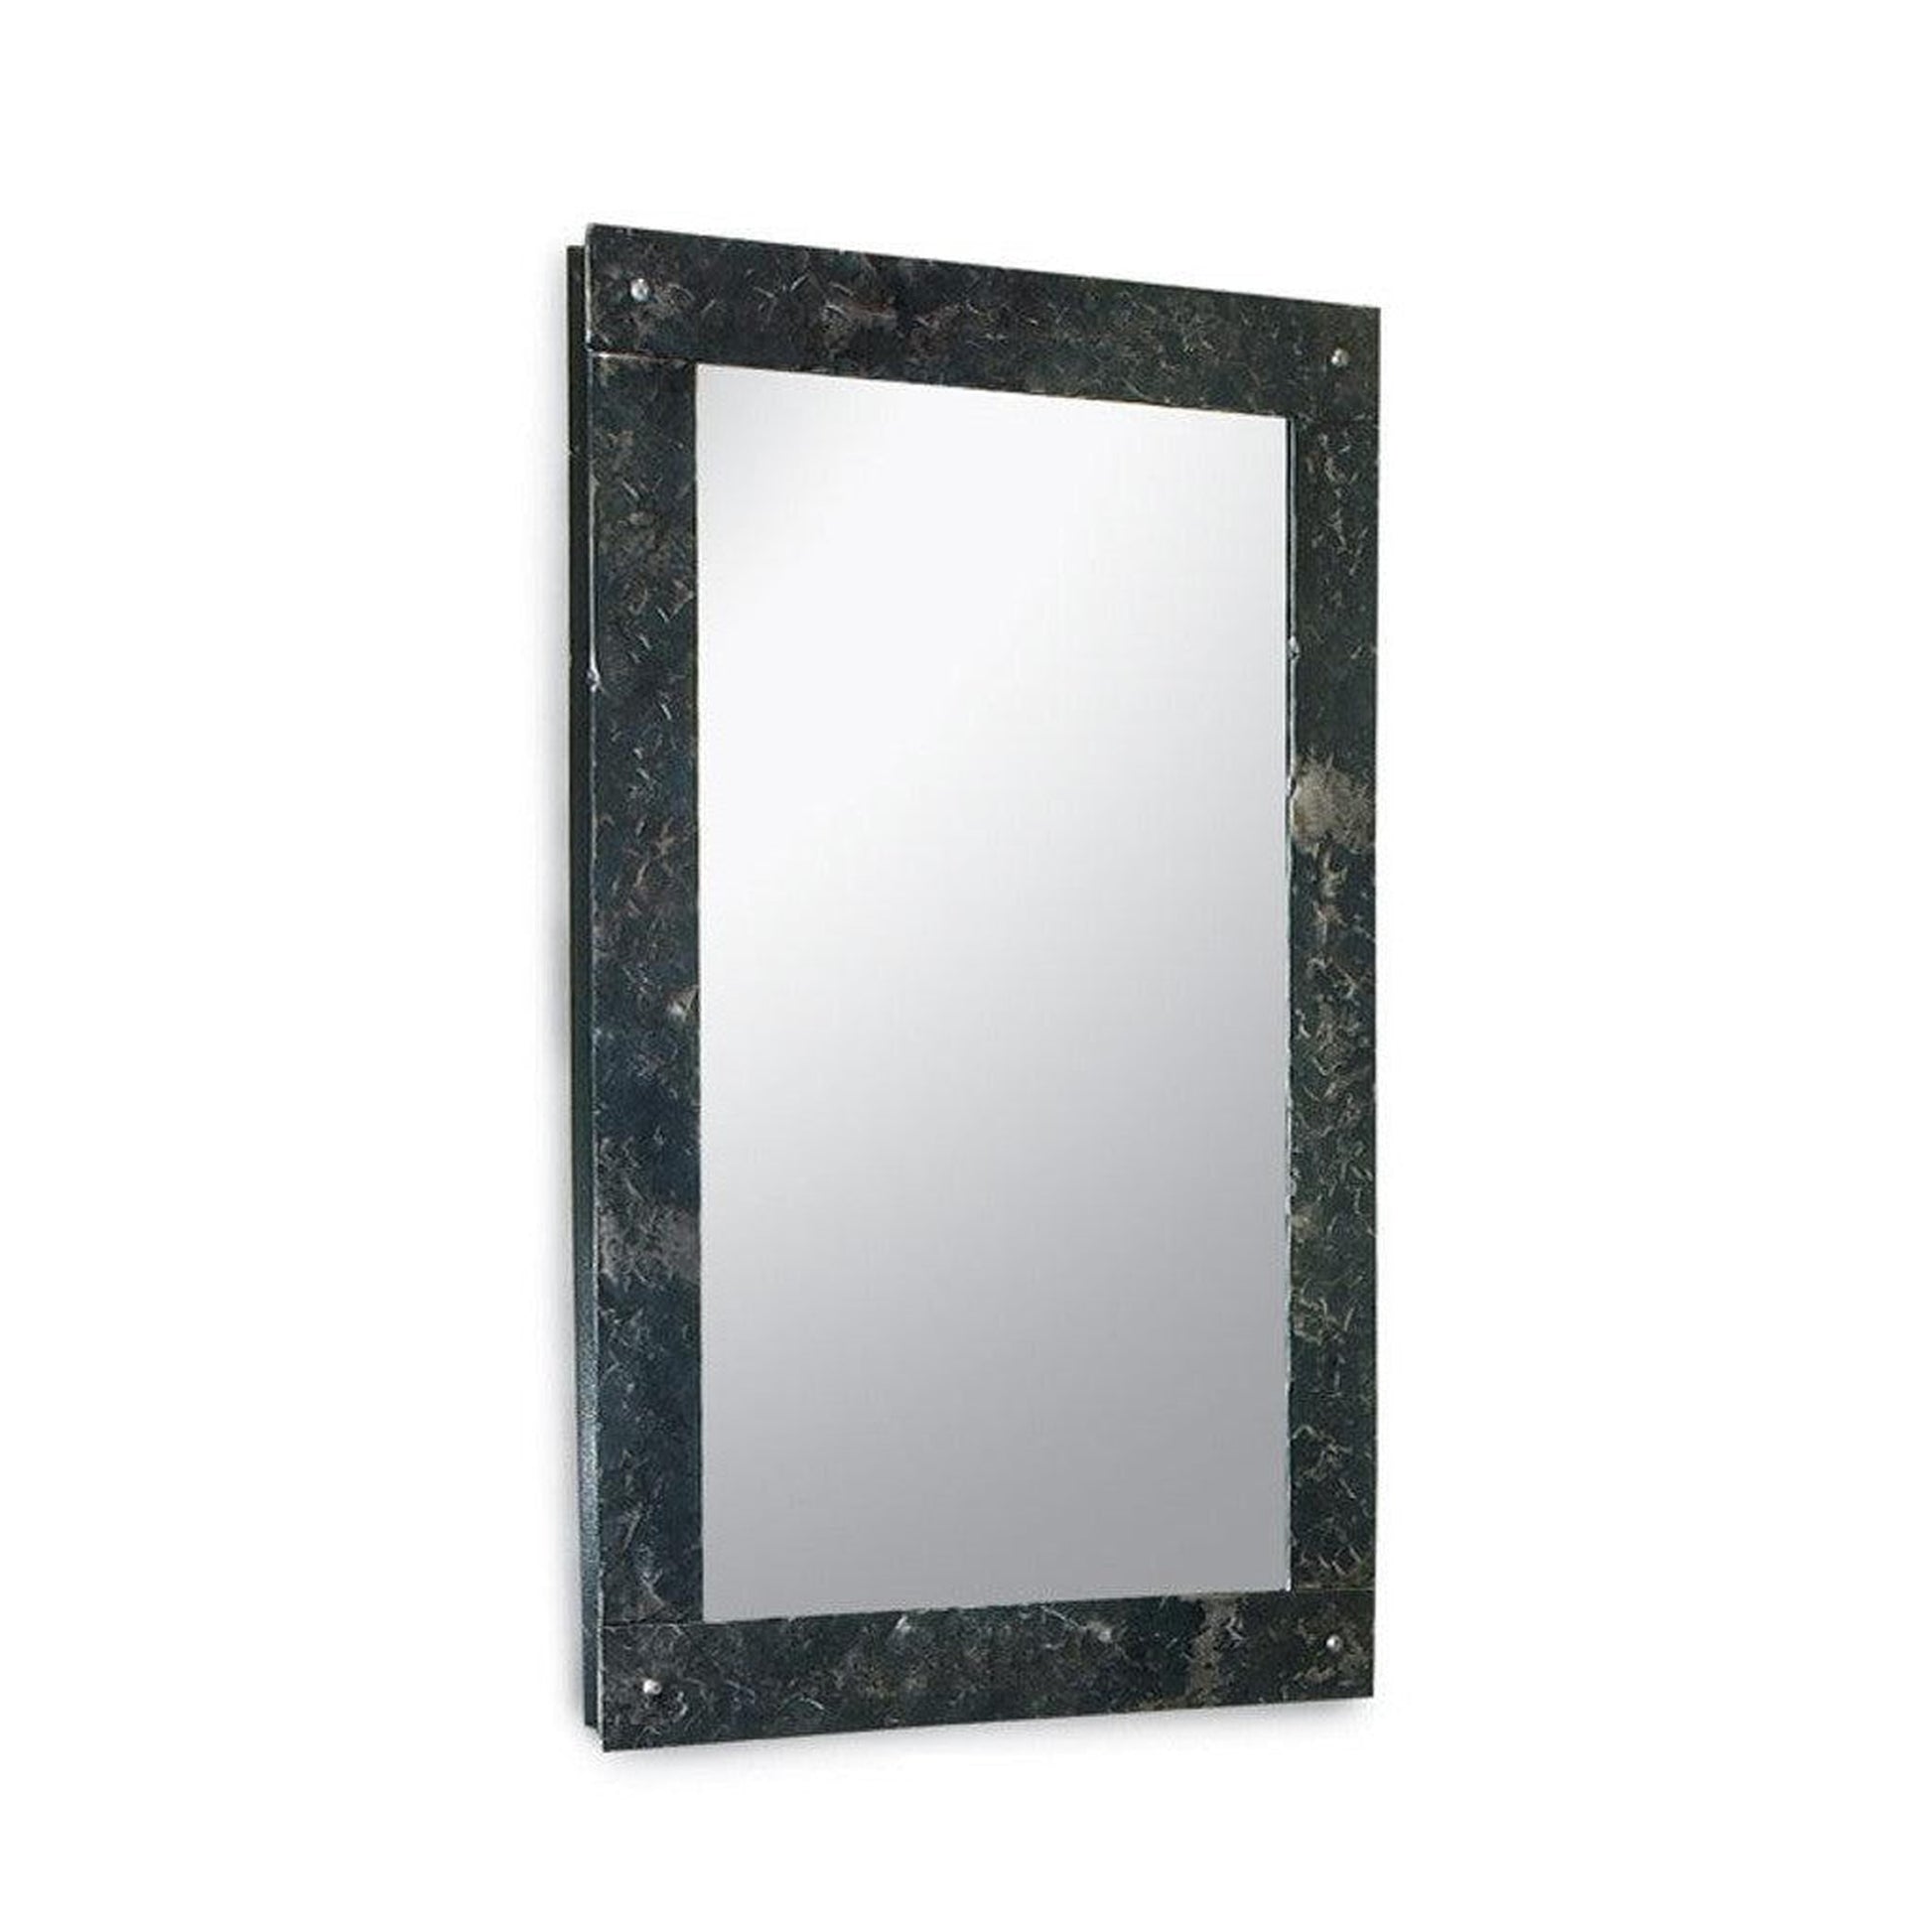 Stone County Ironworks Studio Series 29" x 41" Large Satin Black Iron Wall Mirror With Pewter Iron Accent